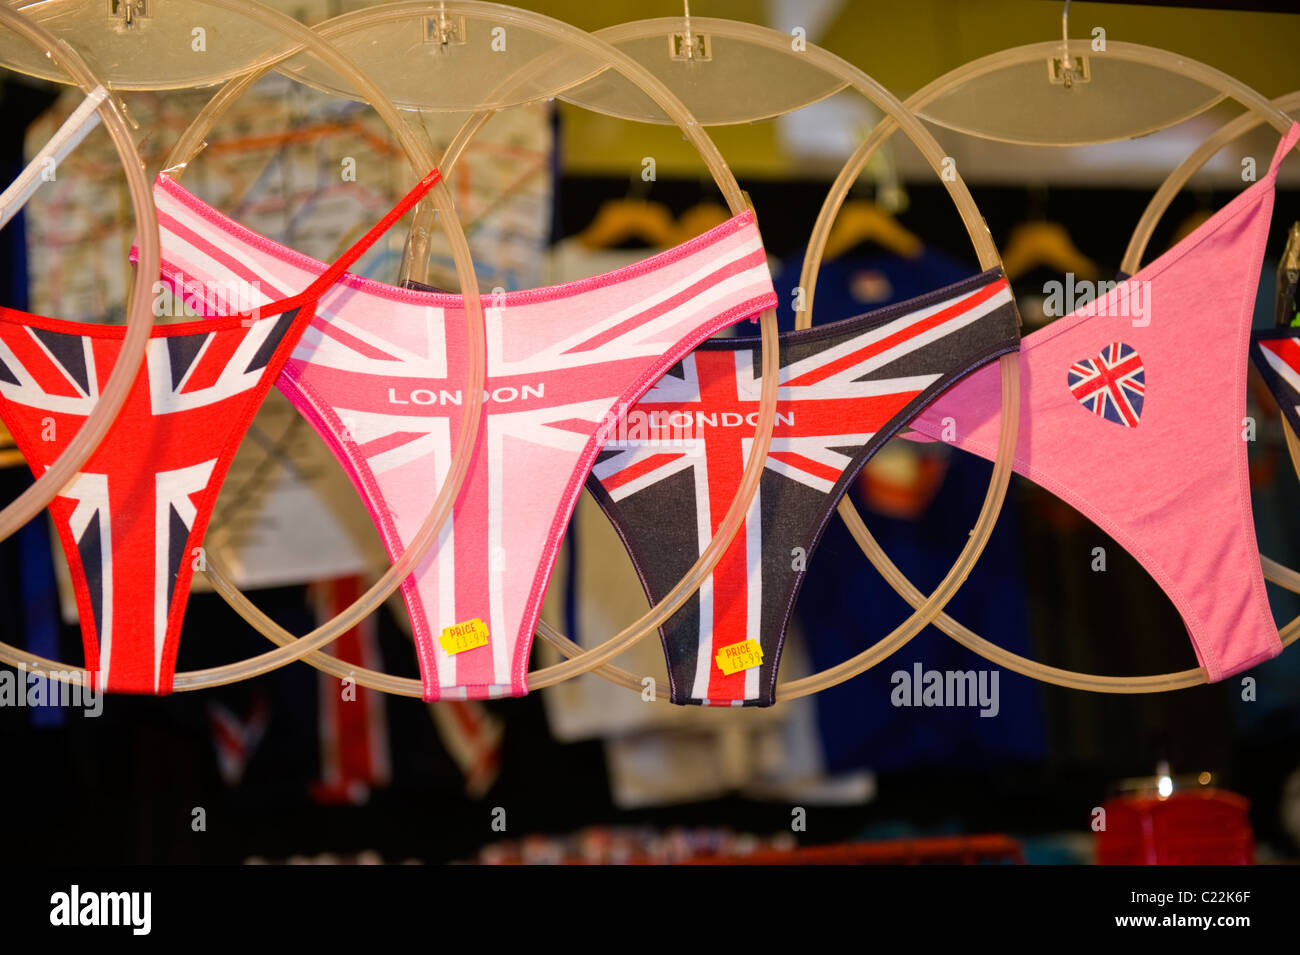 Covent Garden , souvenir stall or shop or kiosk or store selling novelty knickers or pants with London & Union Jack themes Stock Photo